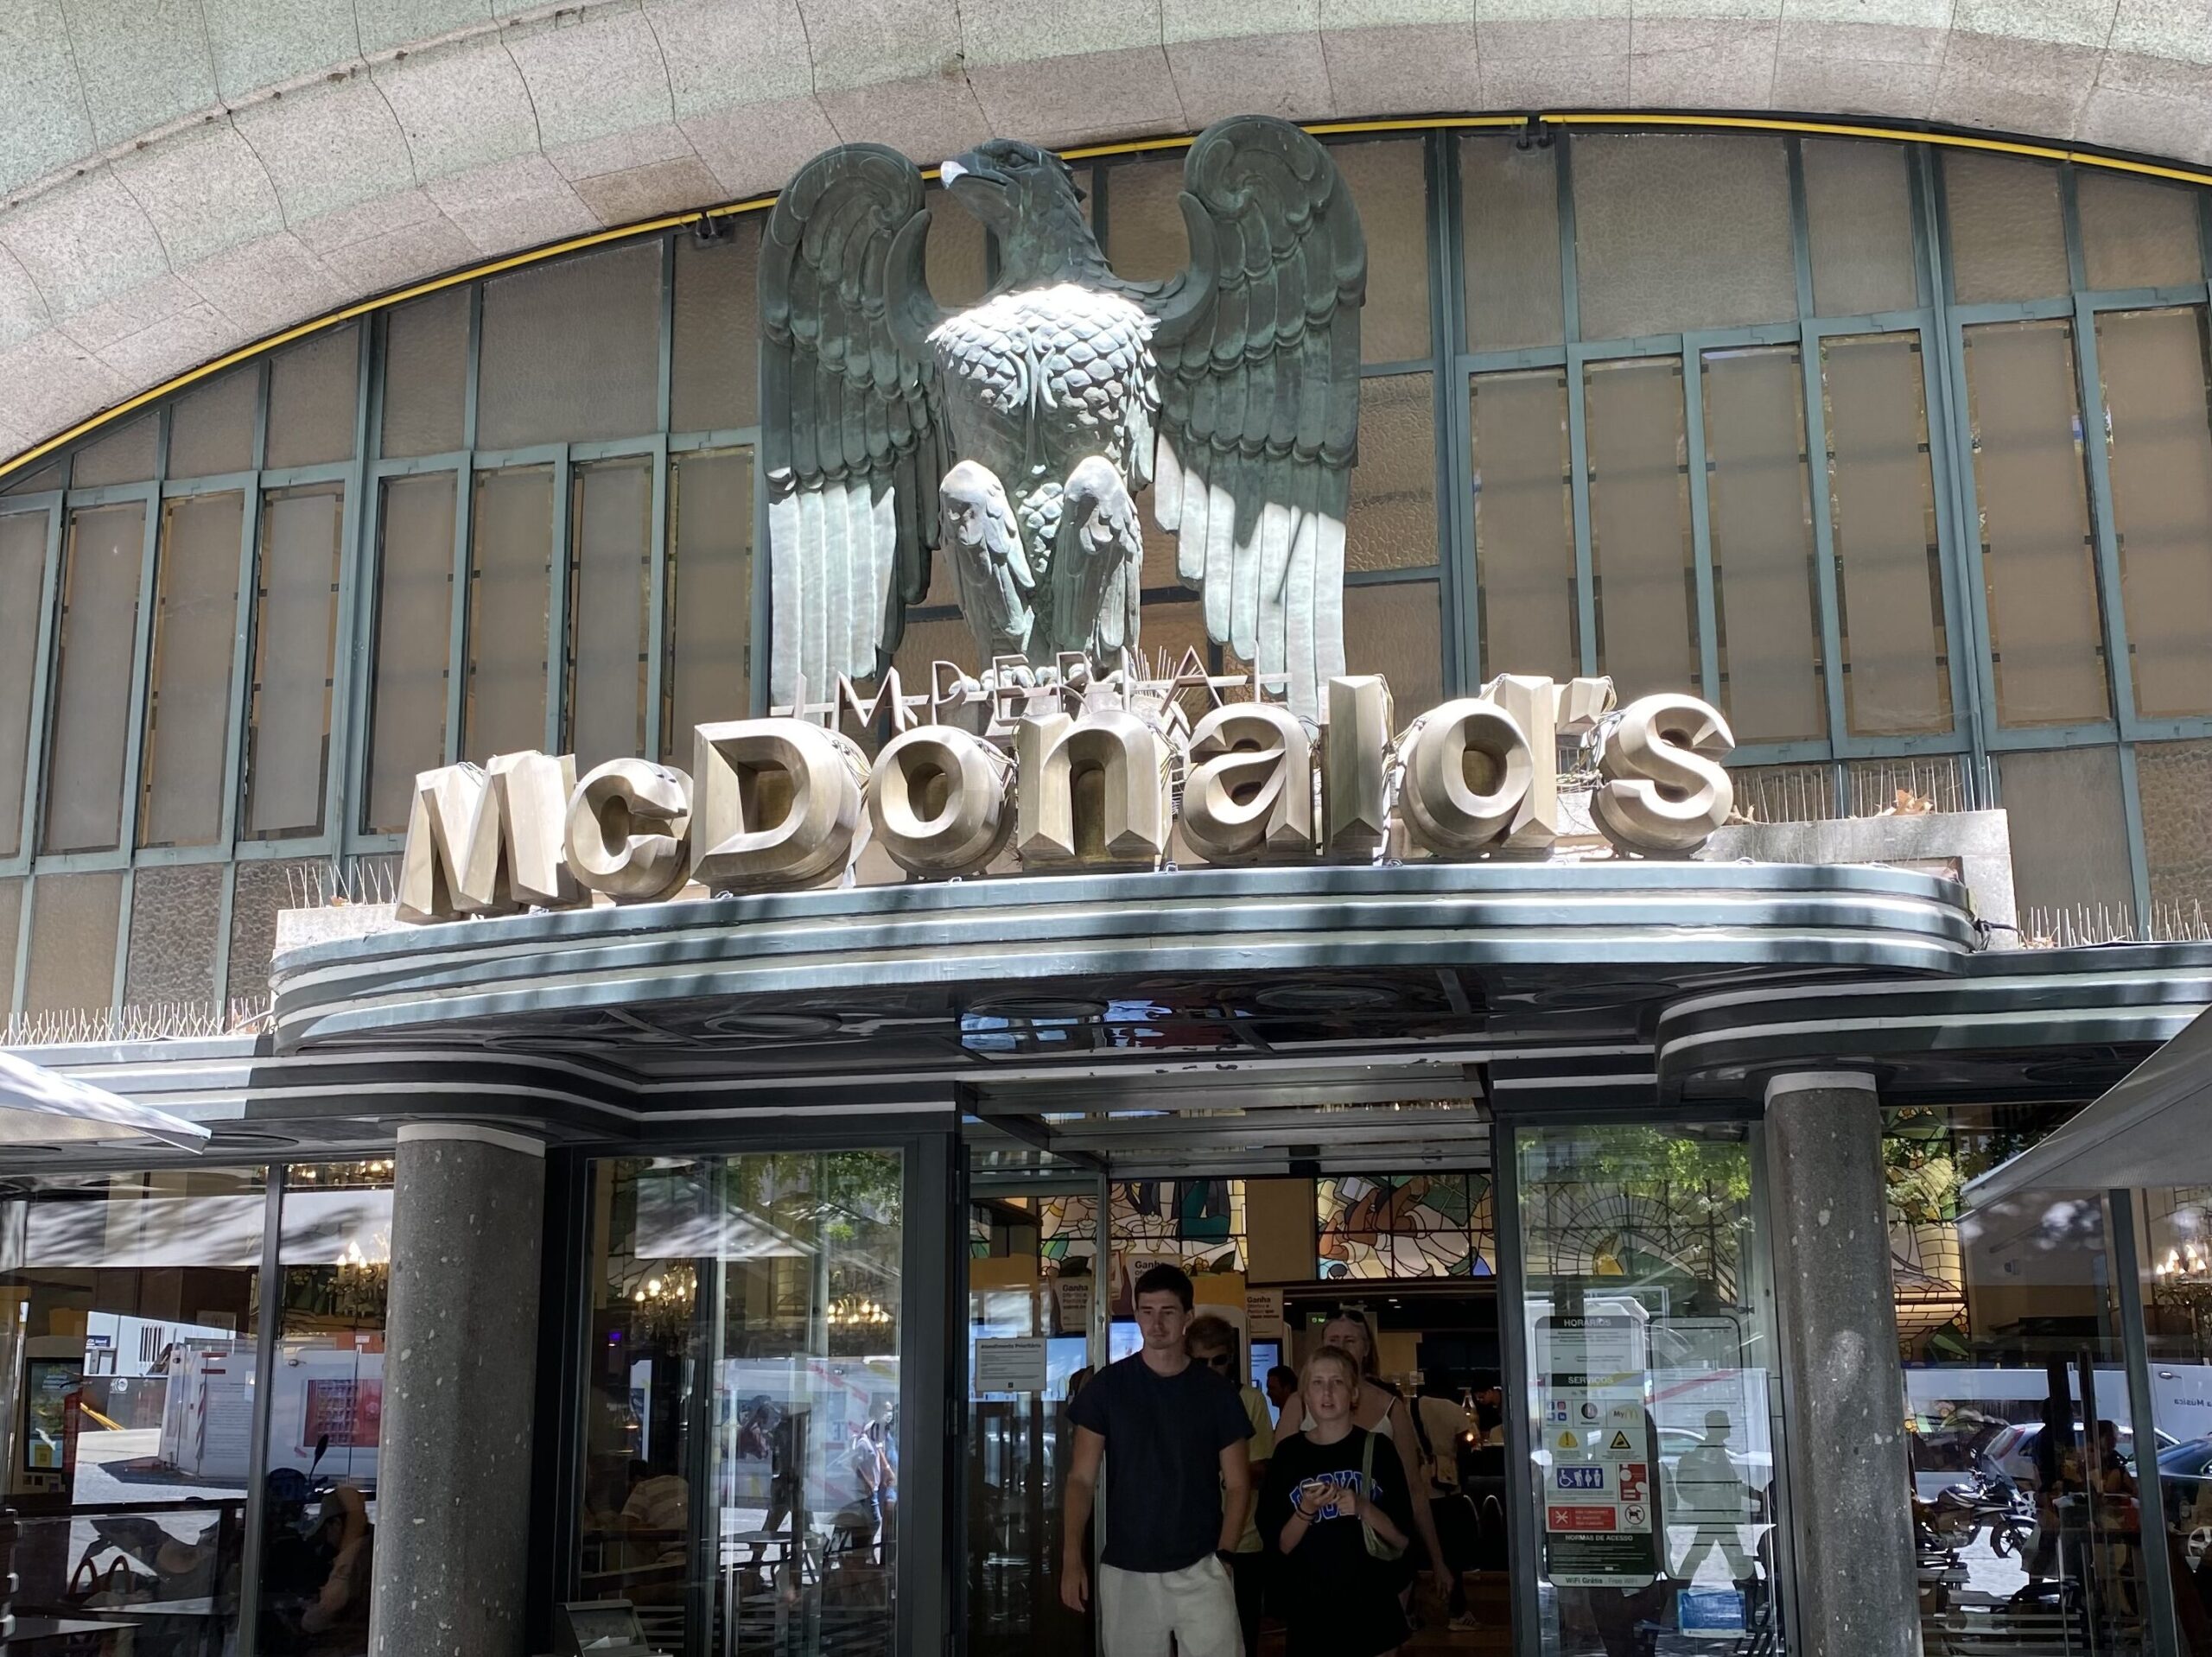 McDonald's entrance in Porto Portugal with eagle over name